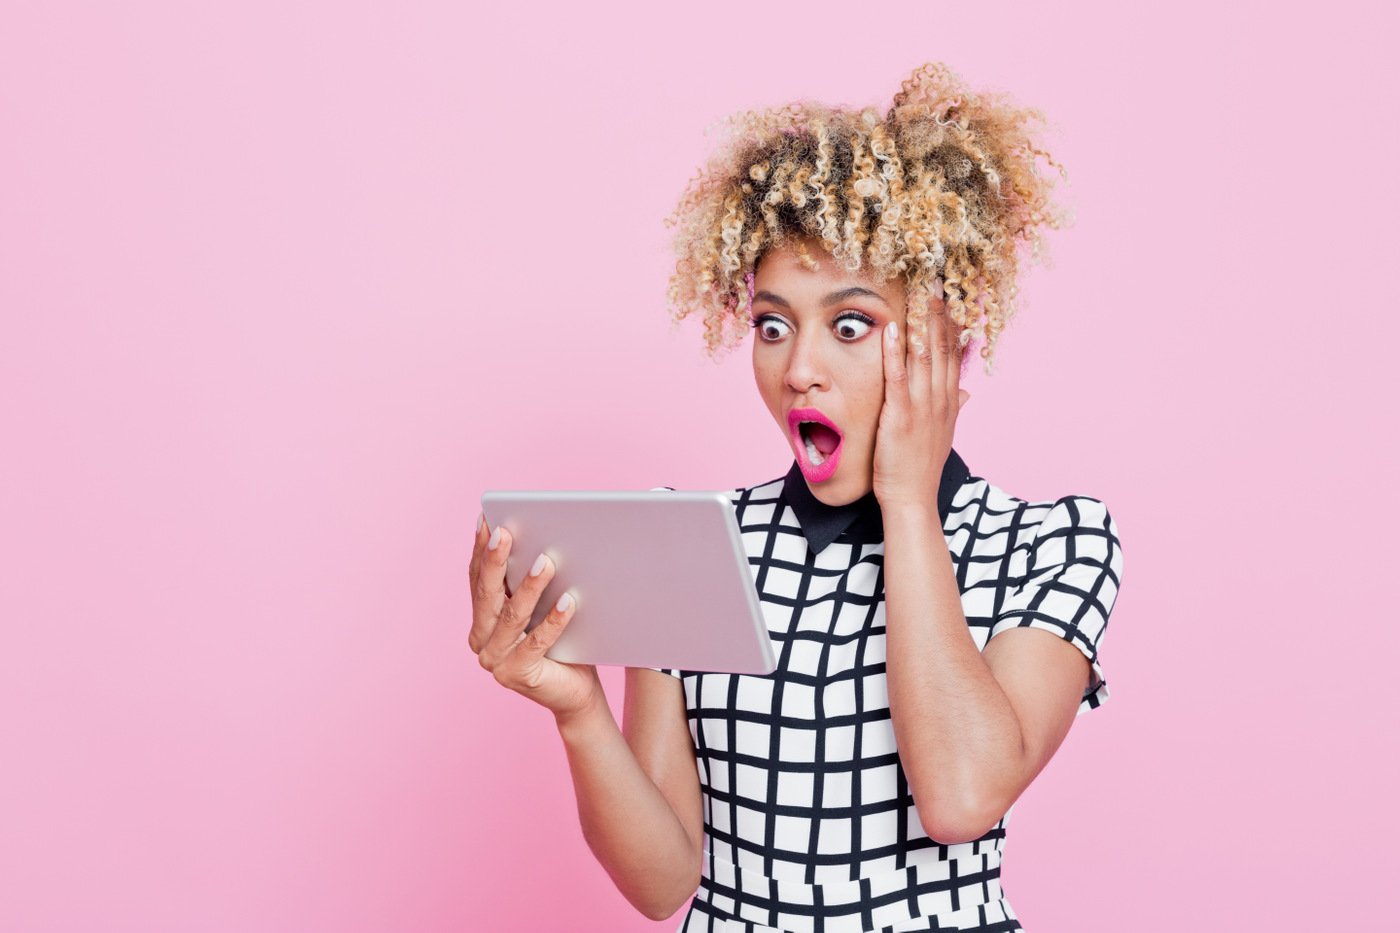 Shocked expression on woman with tablet